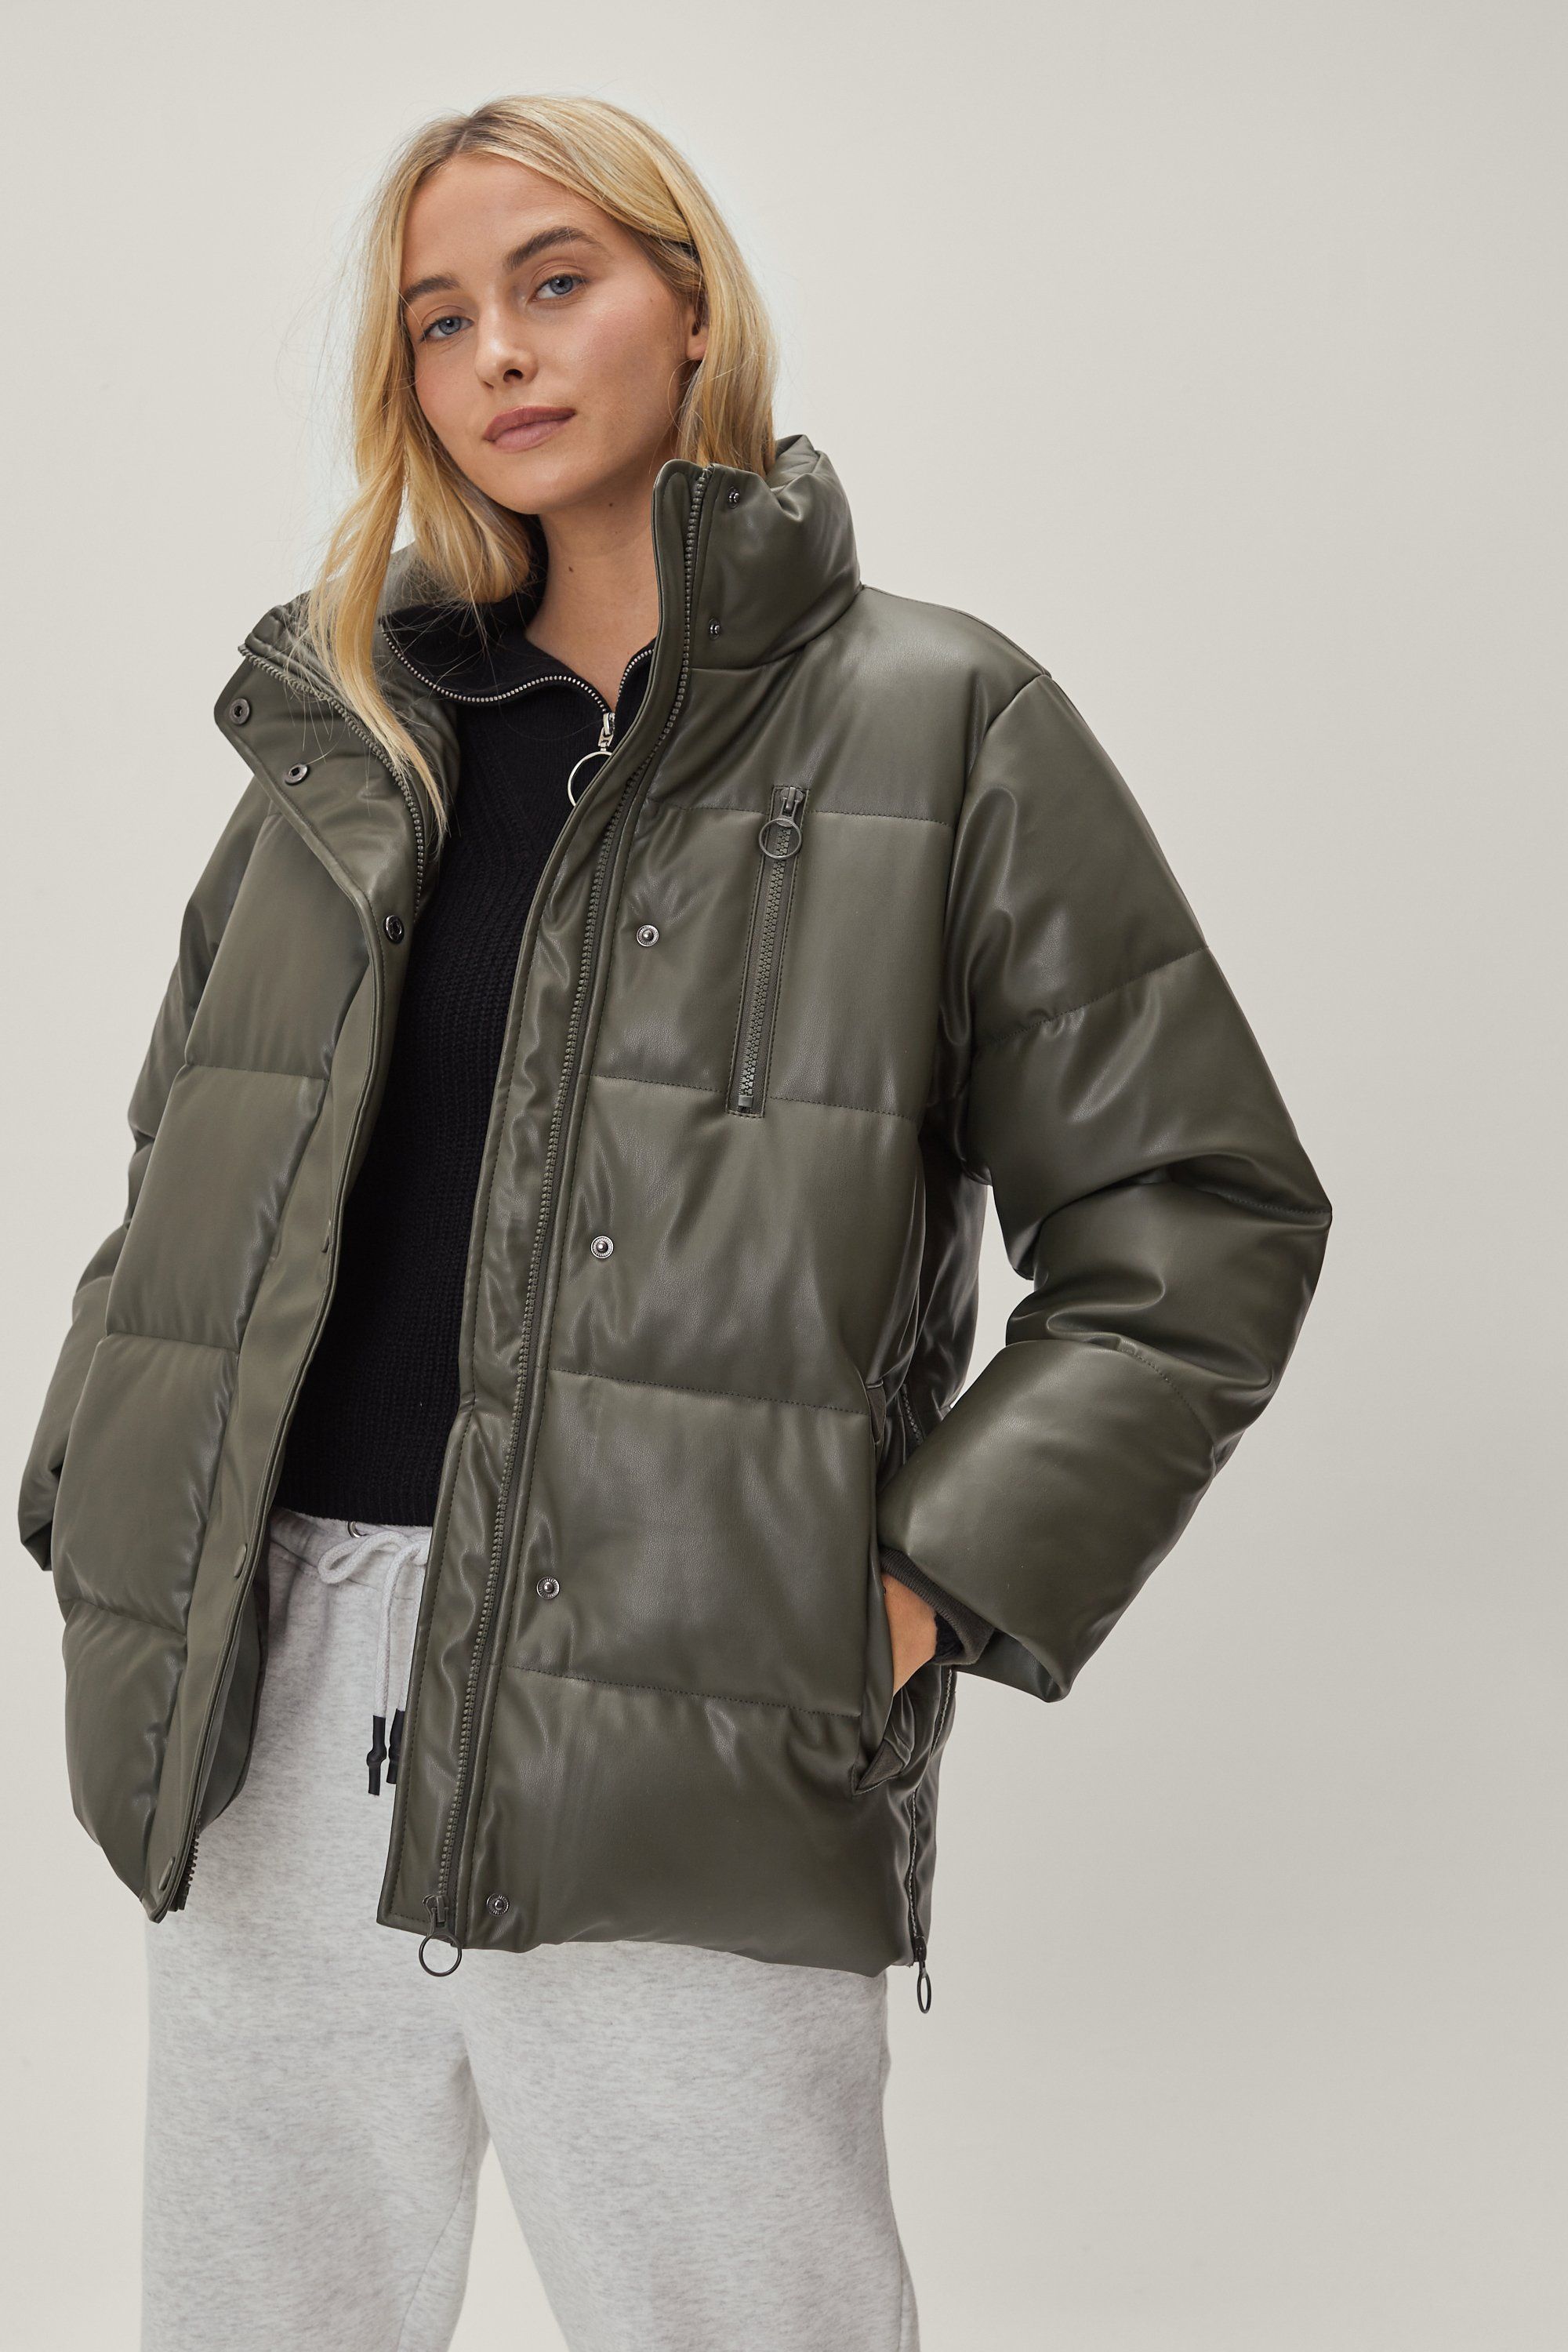 The 15 Best Puffer Jackets to Cozy Up in this Winter – May the Ray